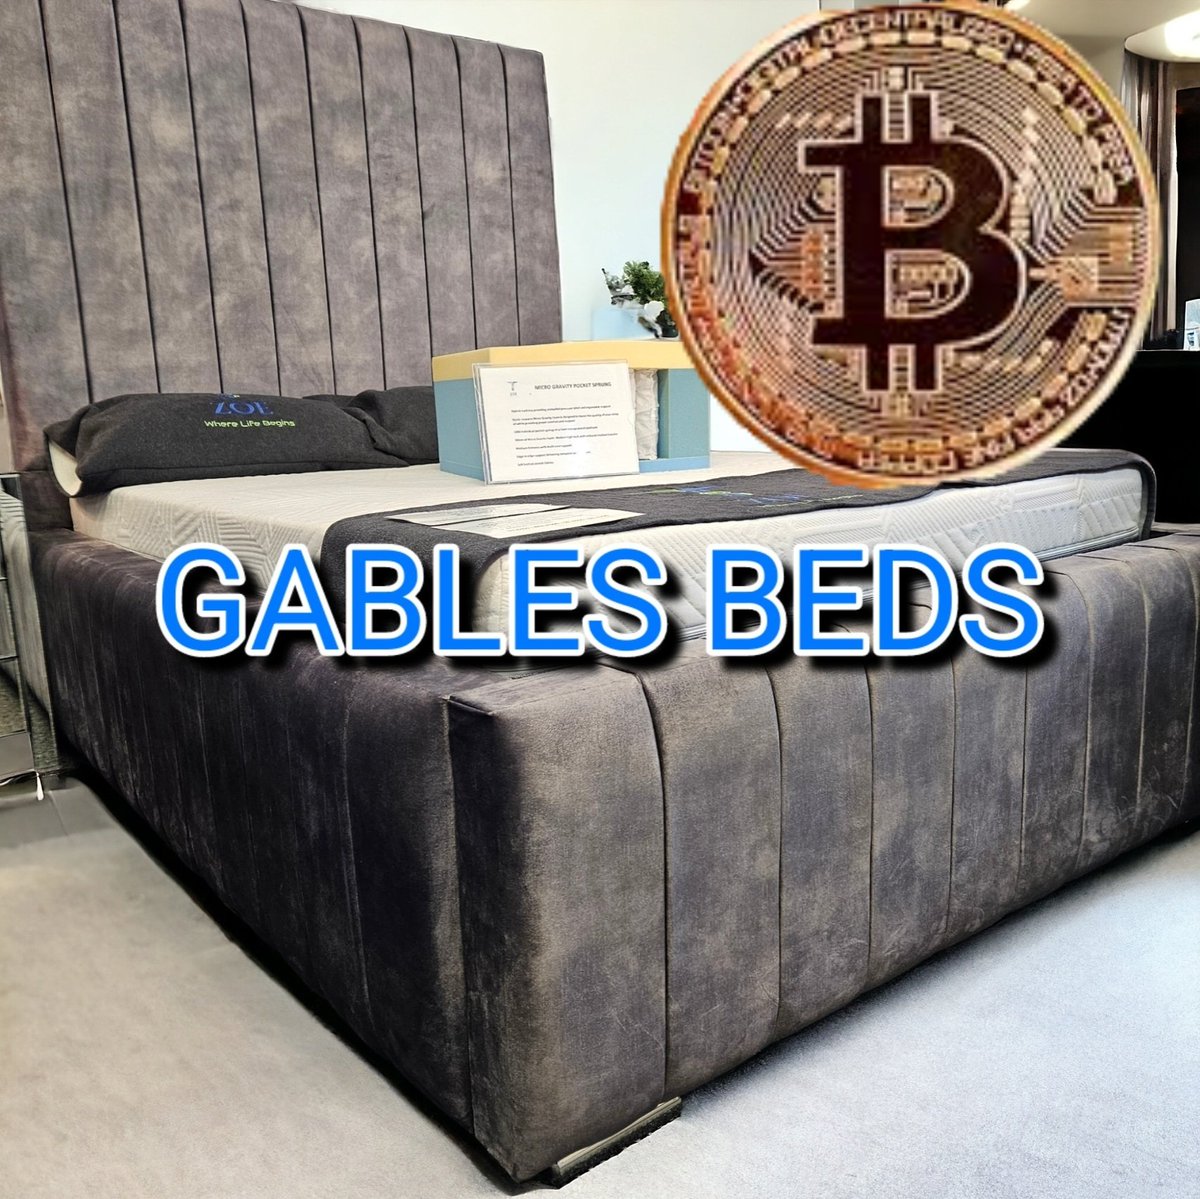 Looking for a new luxury bed? Pay for #beds with #Bitcoin at Gables Beds. Handmade to order with over 50 designer options.

Link in bio #bed #handmade #madeinEngland #crypto